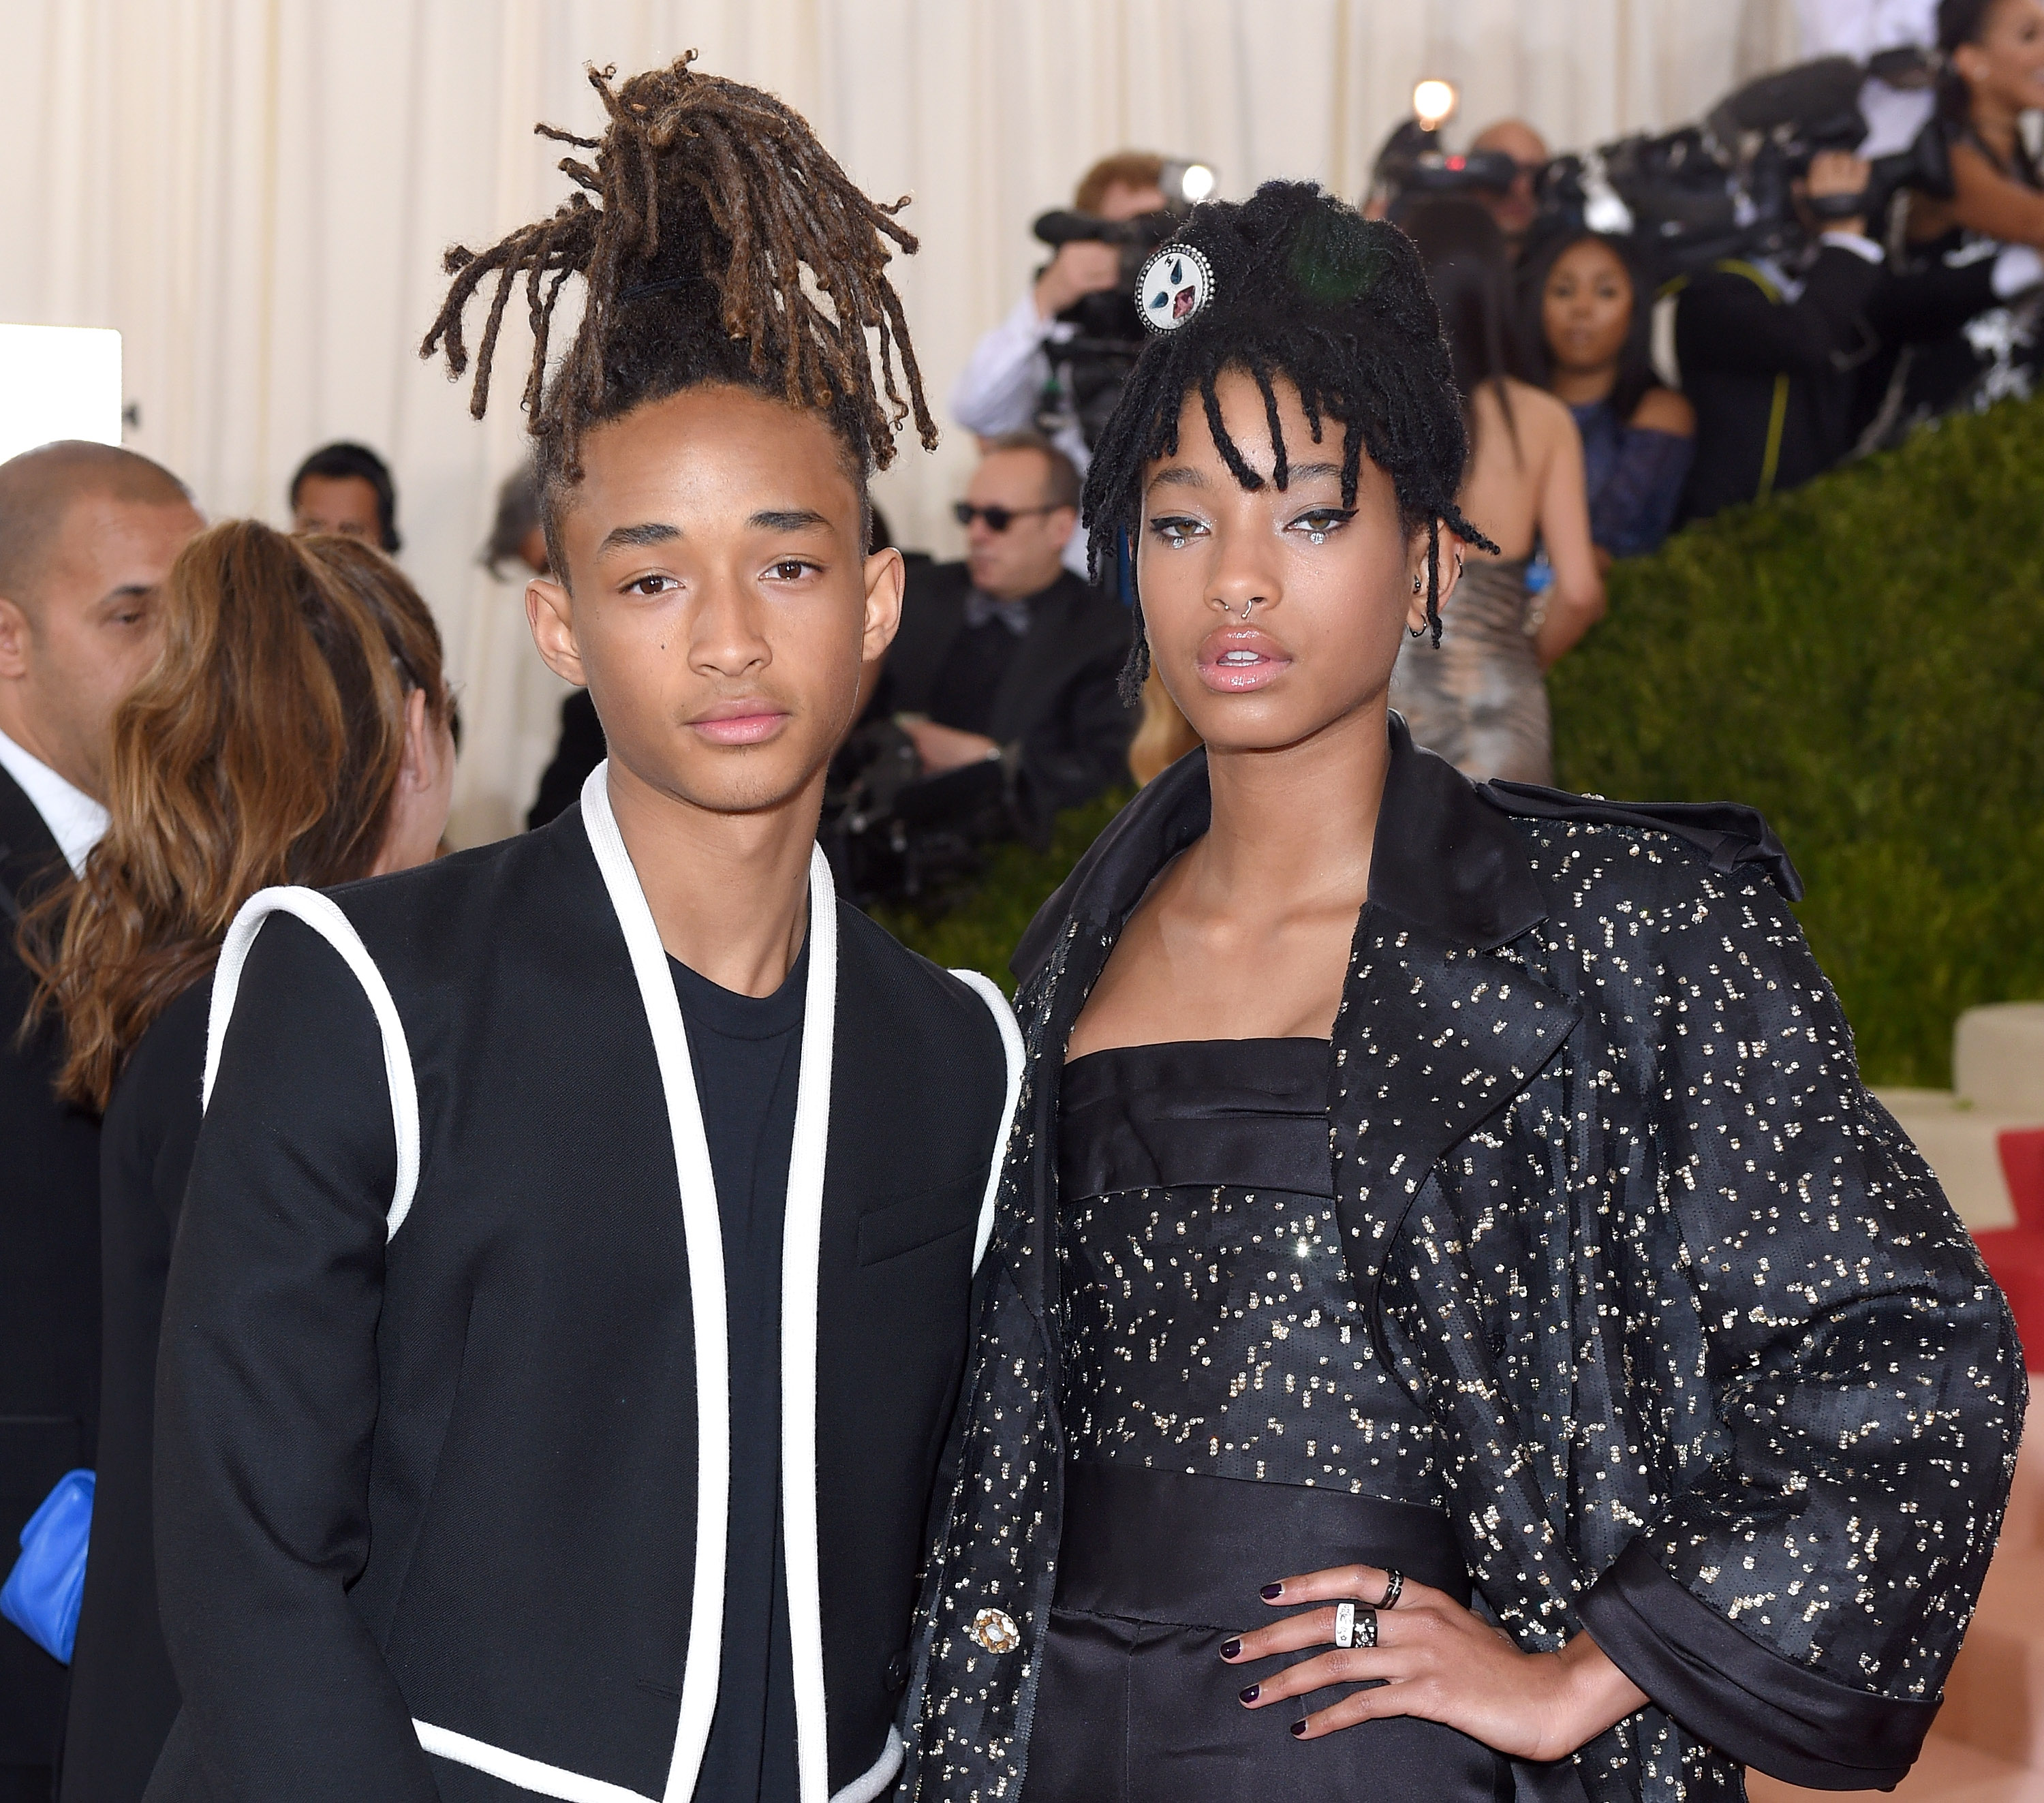 Are Kids Allowed at the Met Gala? Age Restriction Details | Closer Weekly